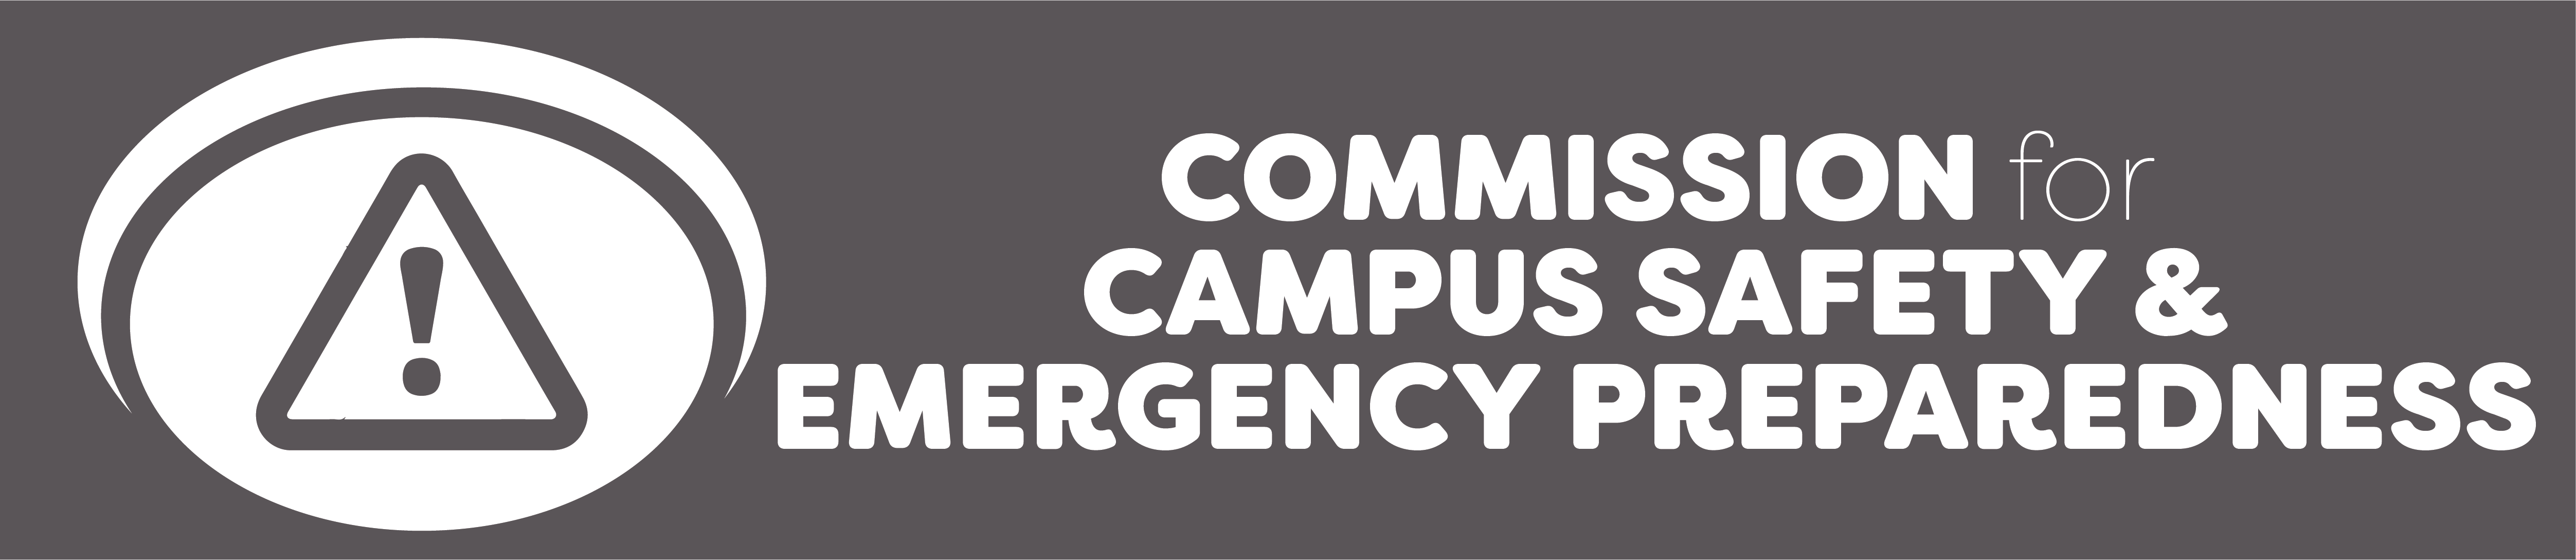 Commission for Campus Safety & Emergency preparedness logo